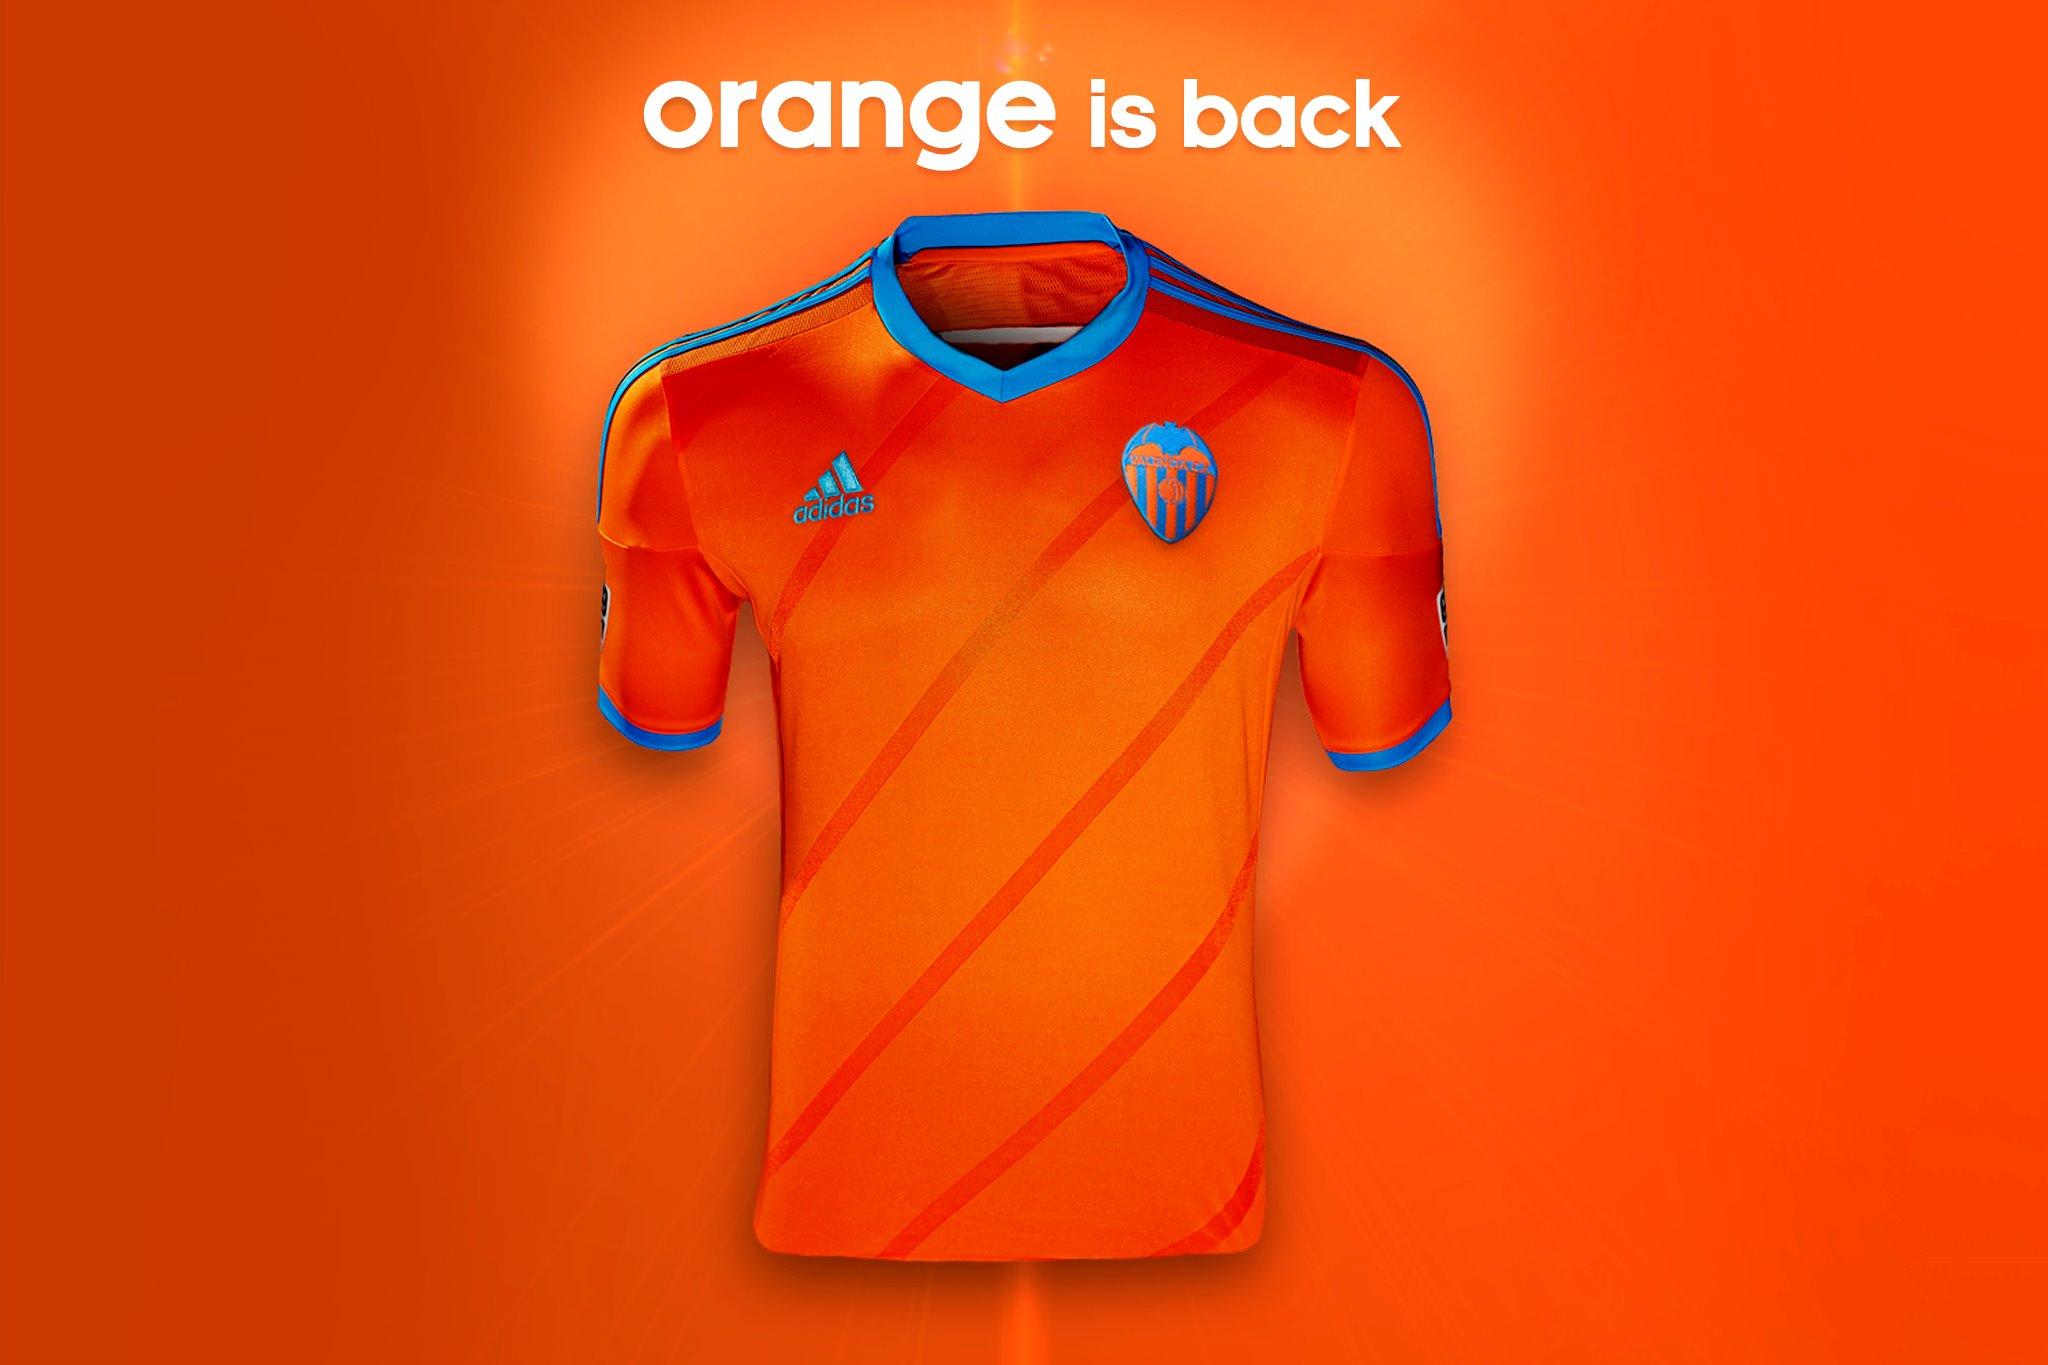 CF on Twitter: "#allinvalenciacf IS BACK Discover new VCF away shirt http://t.co/UP7nEazctG http://t.co/2mGsqWZYpR" / Twitter